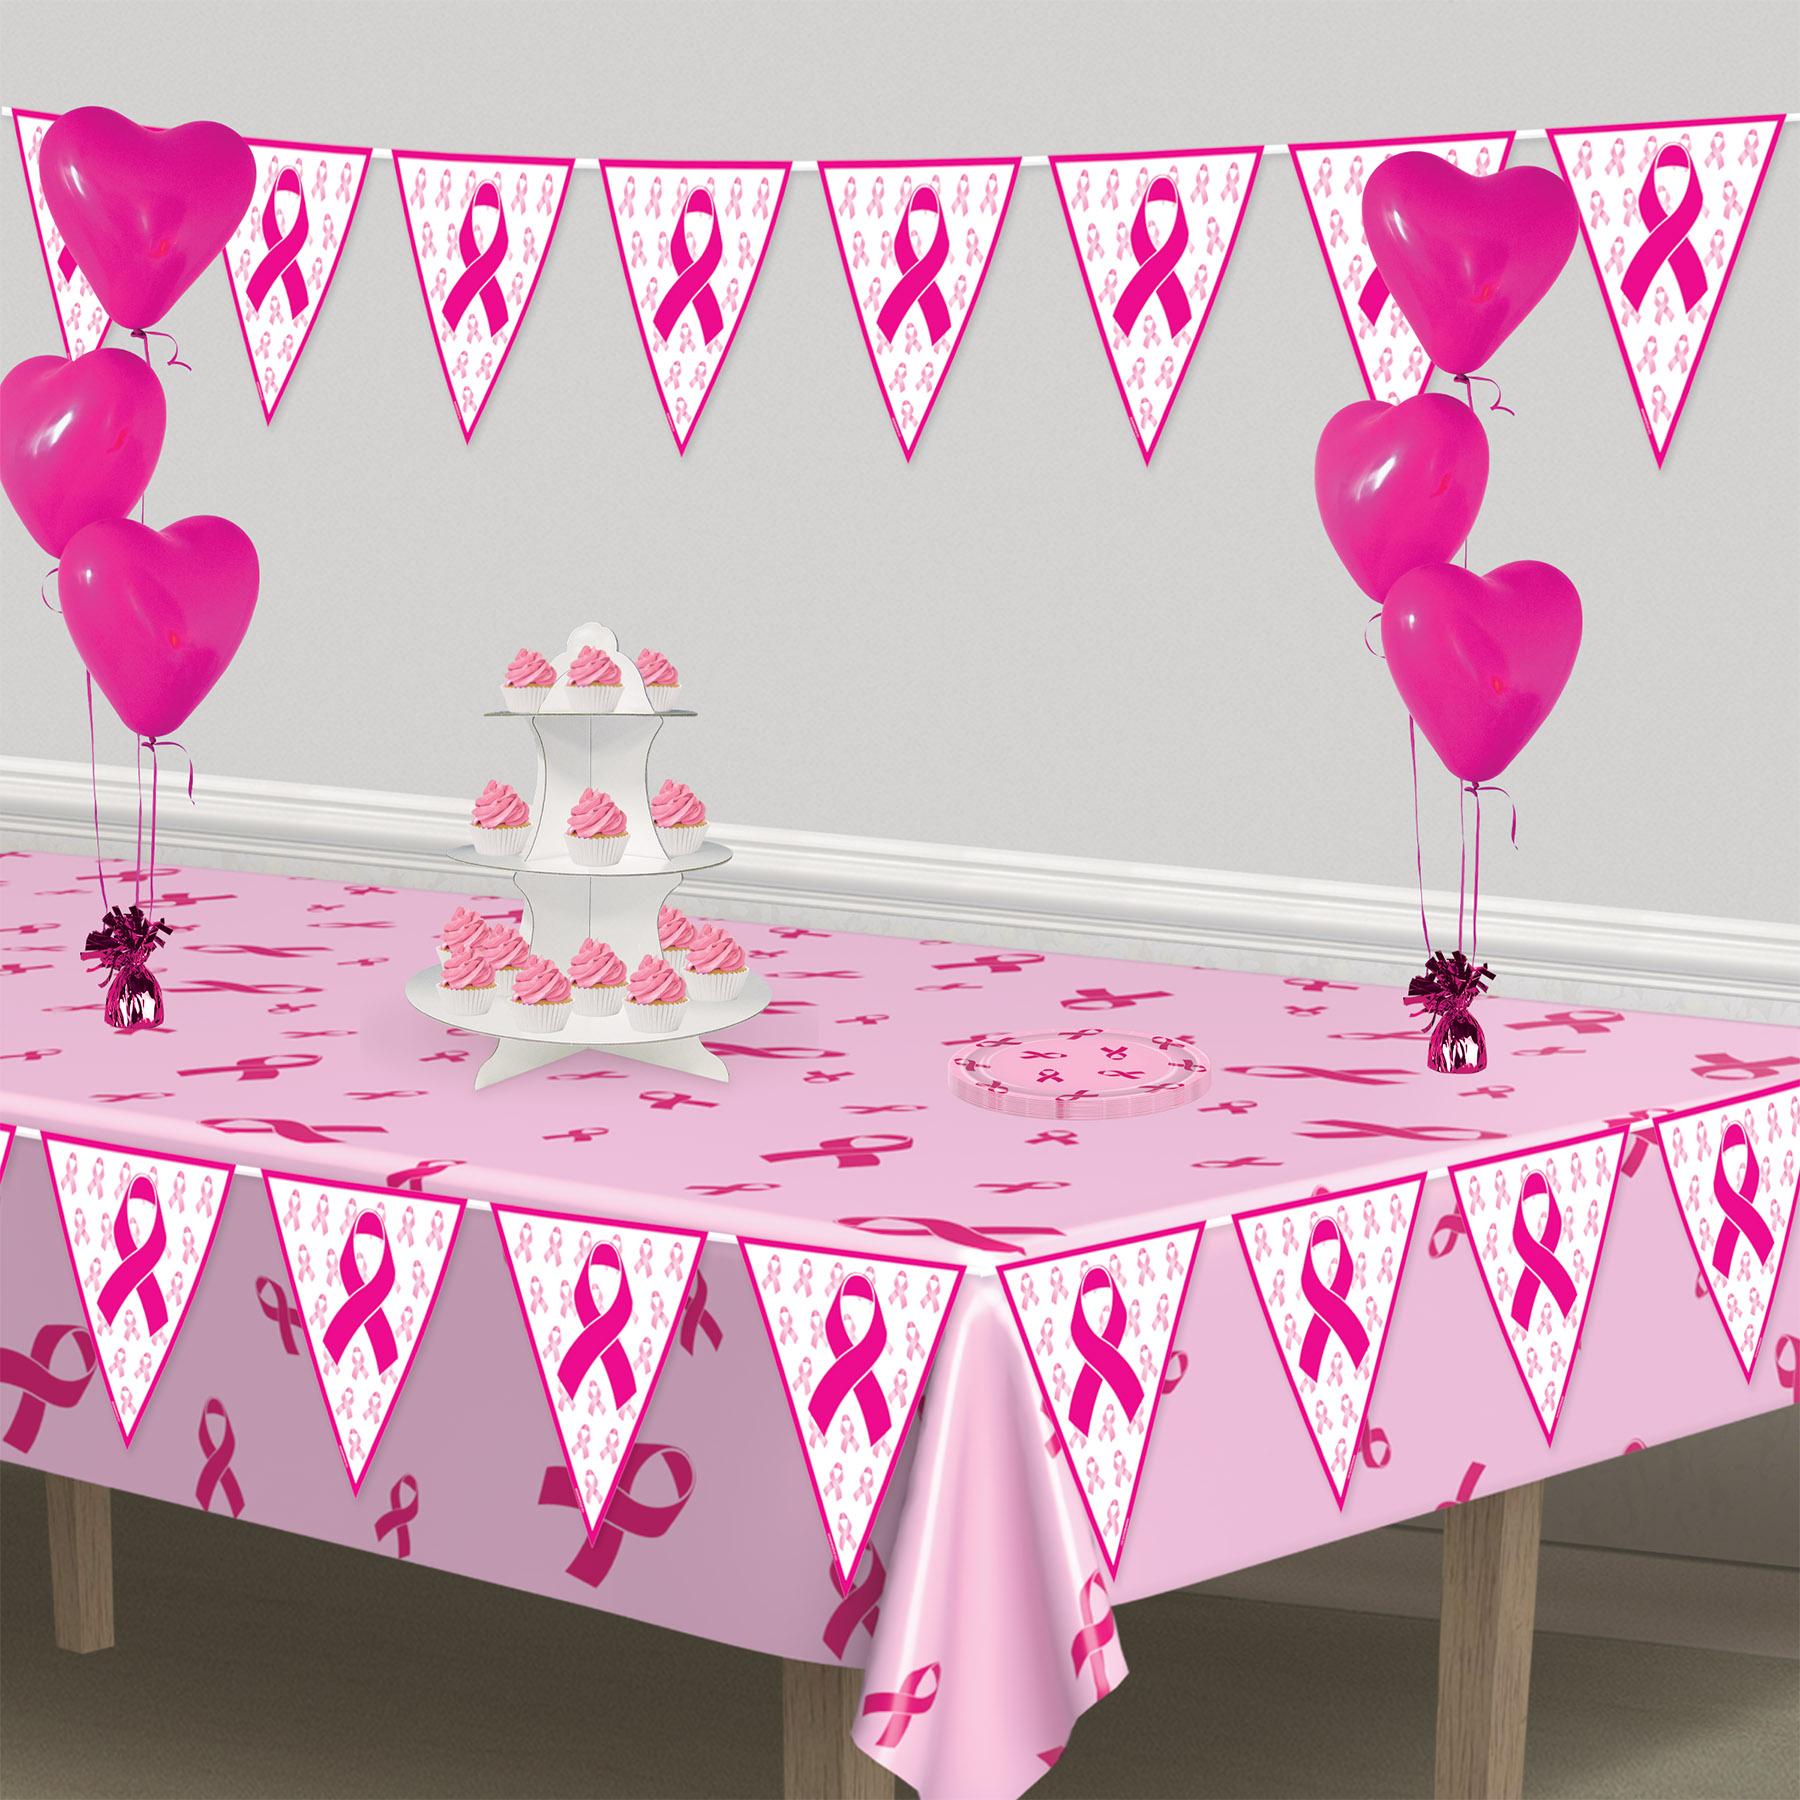 Beistle Pink Ribbon Pennant Party Banner